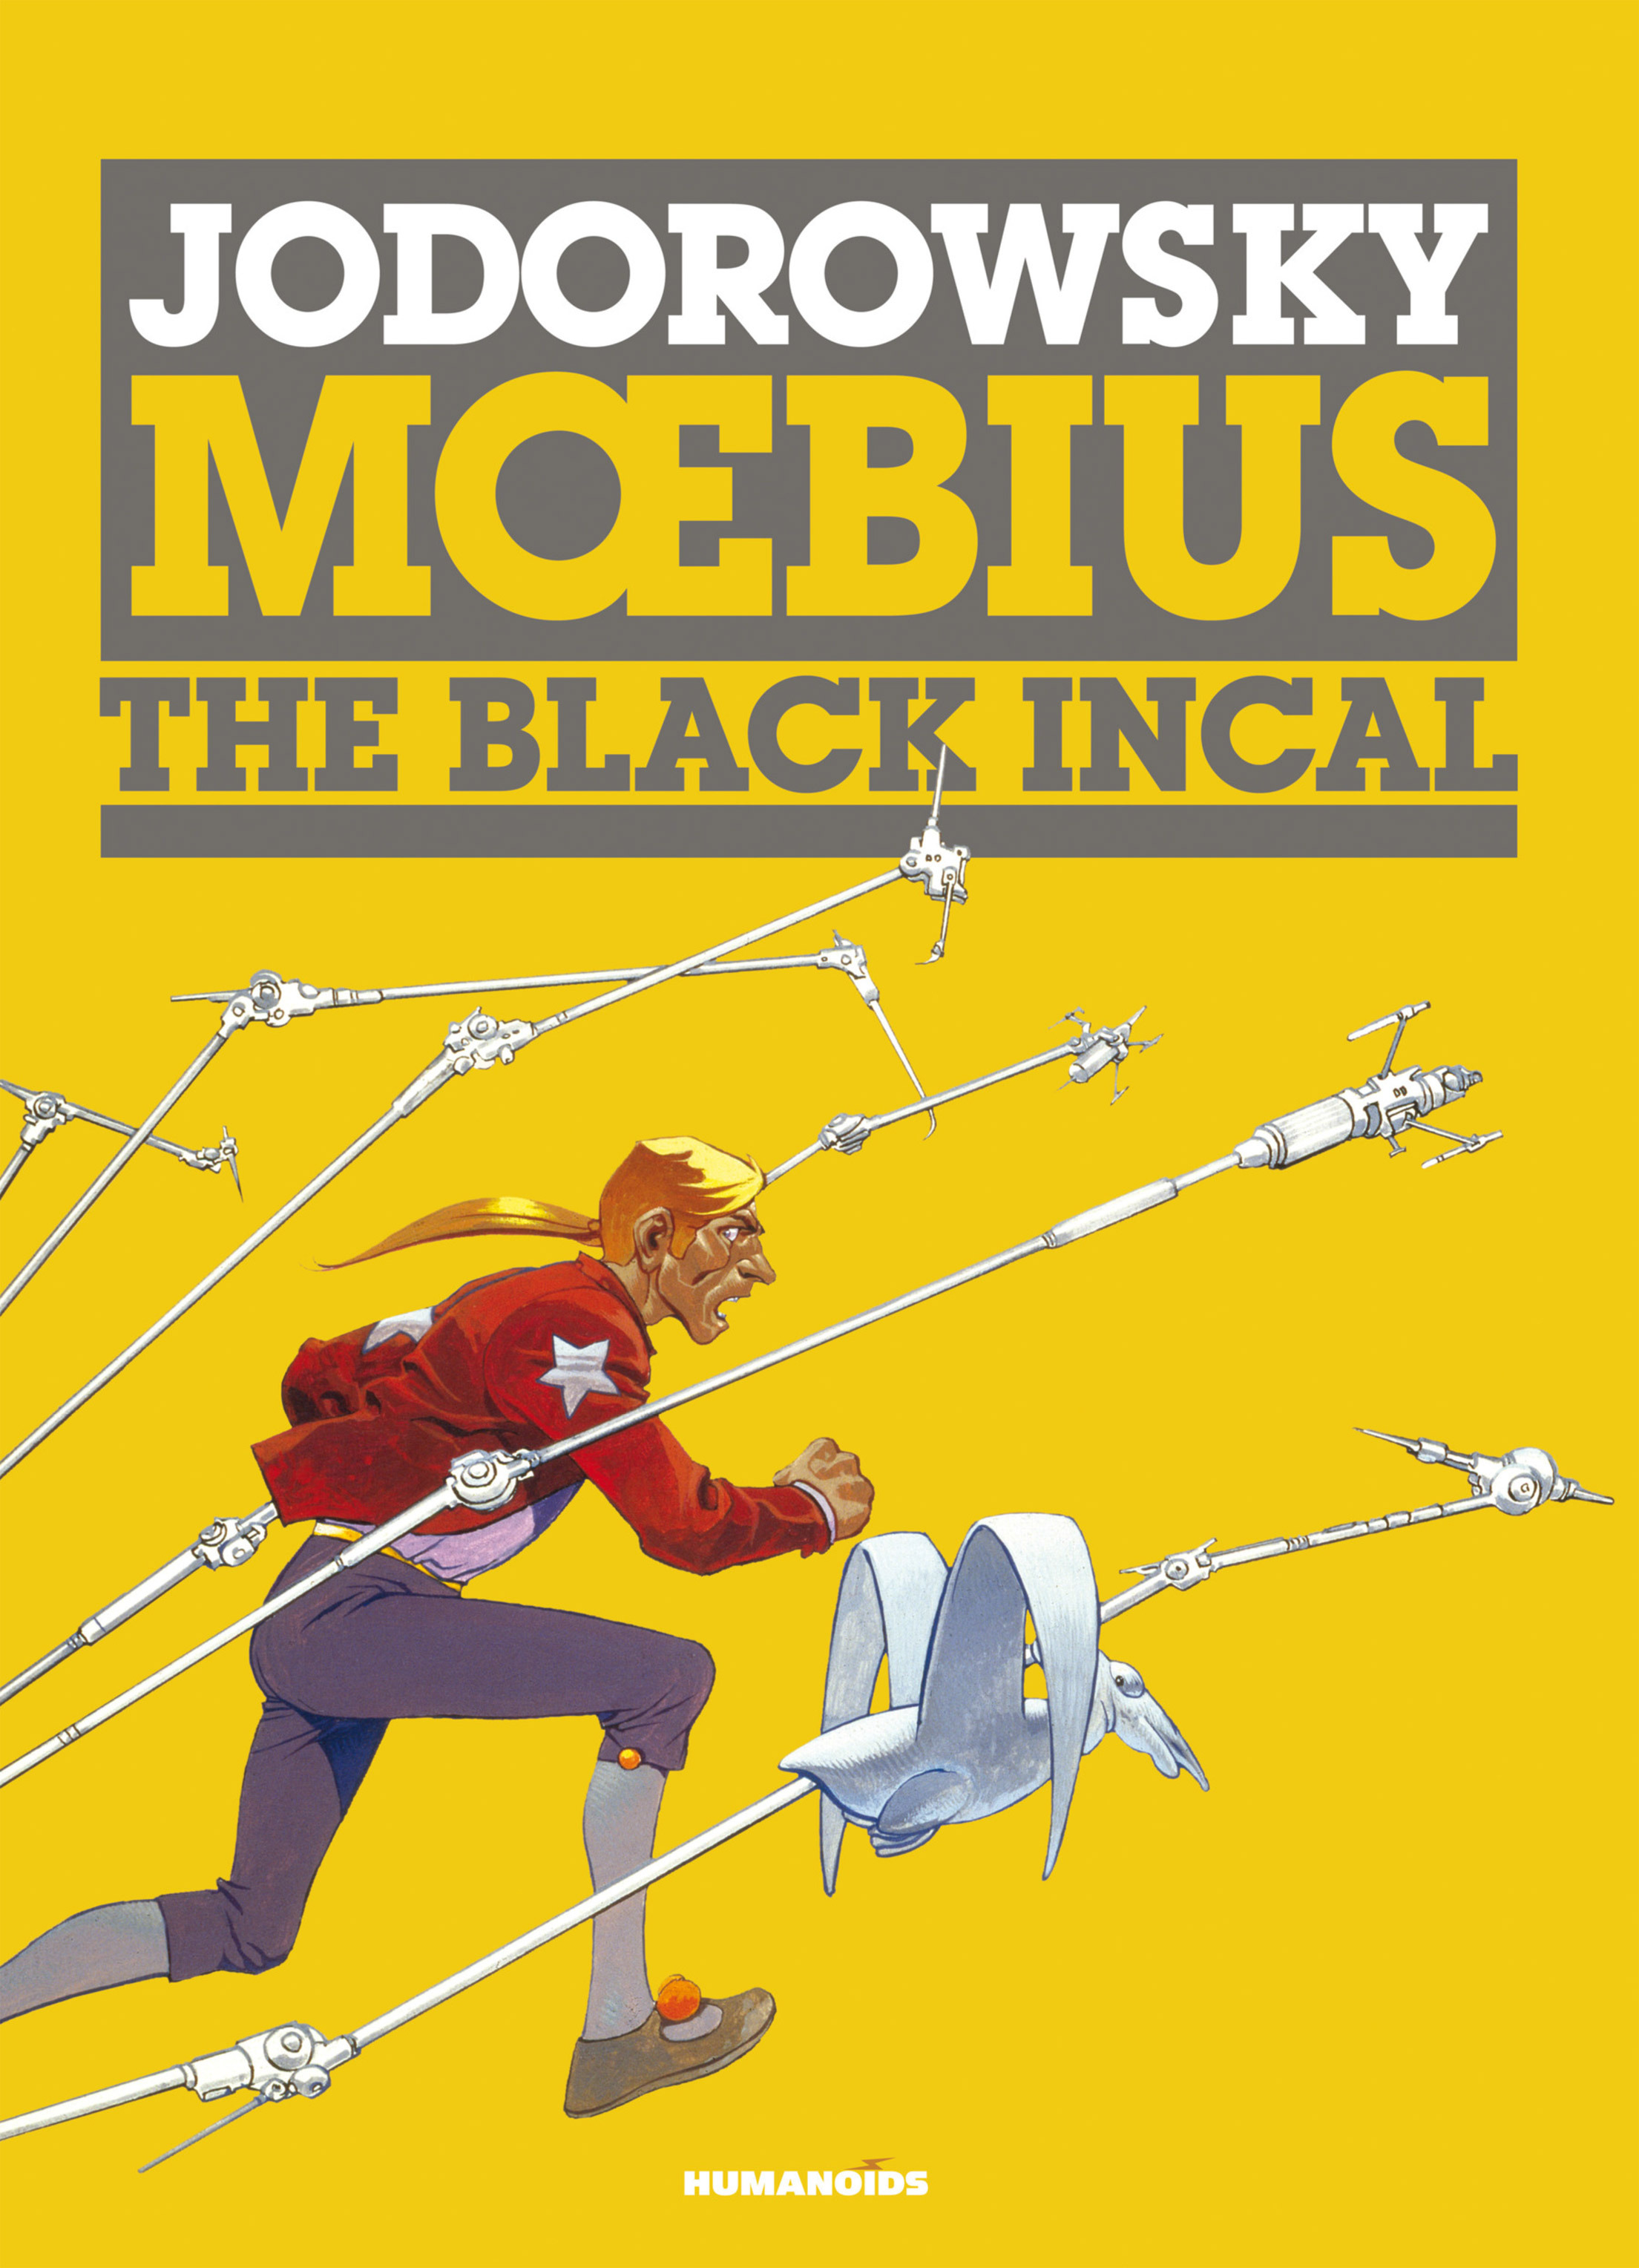 Read online The Incal comic -  Issue # TPB 1 - 1